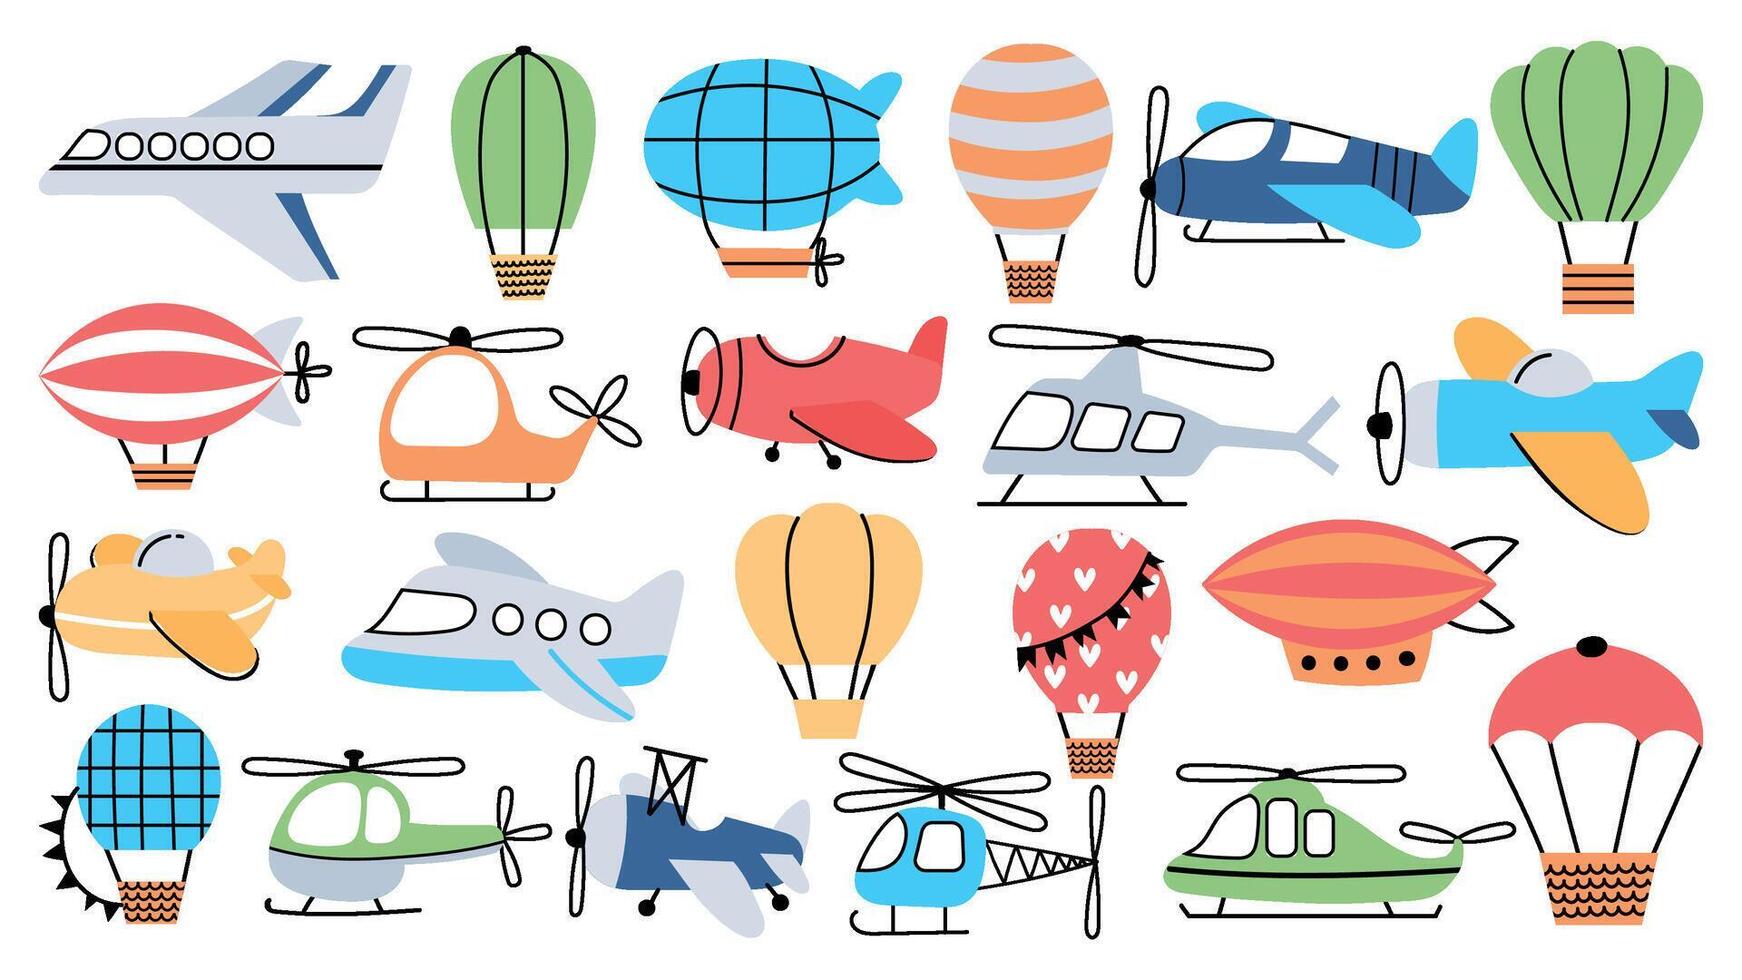 Air transport in childish style, plane, helicopter, airship and balloon. Flying airplanes for kids nursery decoration, traveling vector set